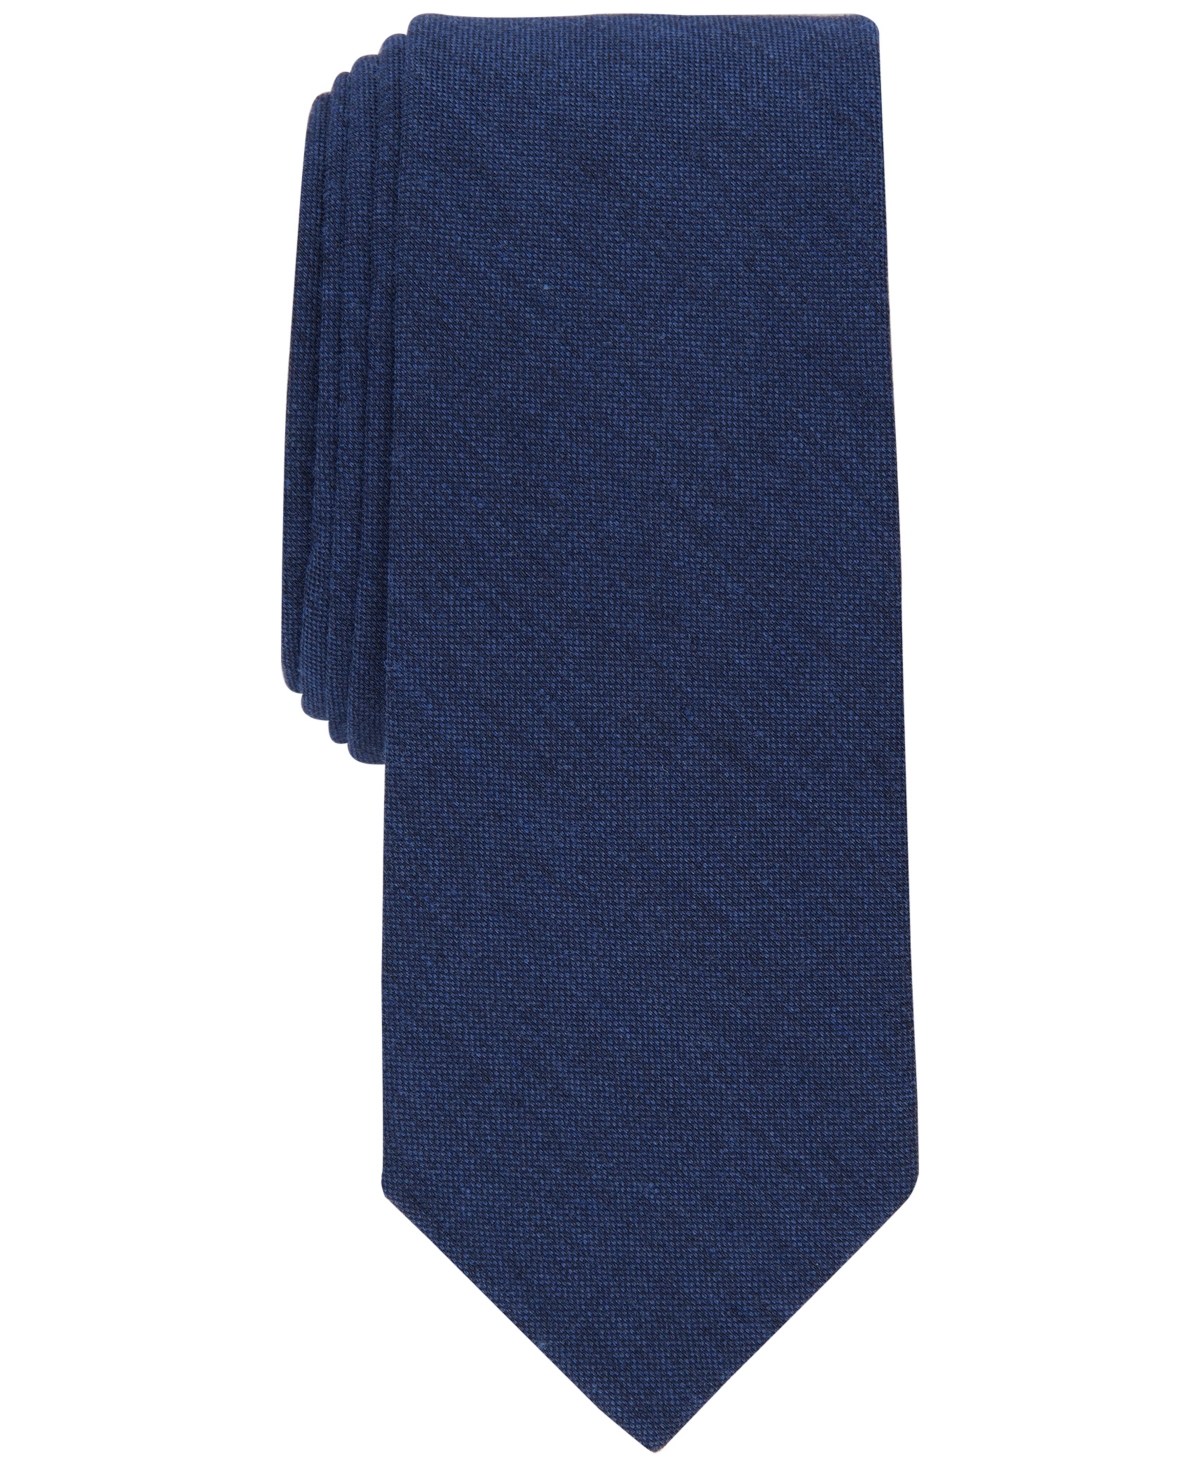 Men's Jean Solid Tie, Created for Macy's - Blue